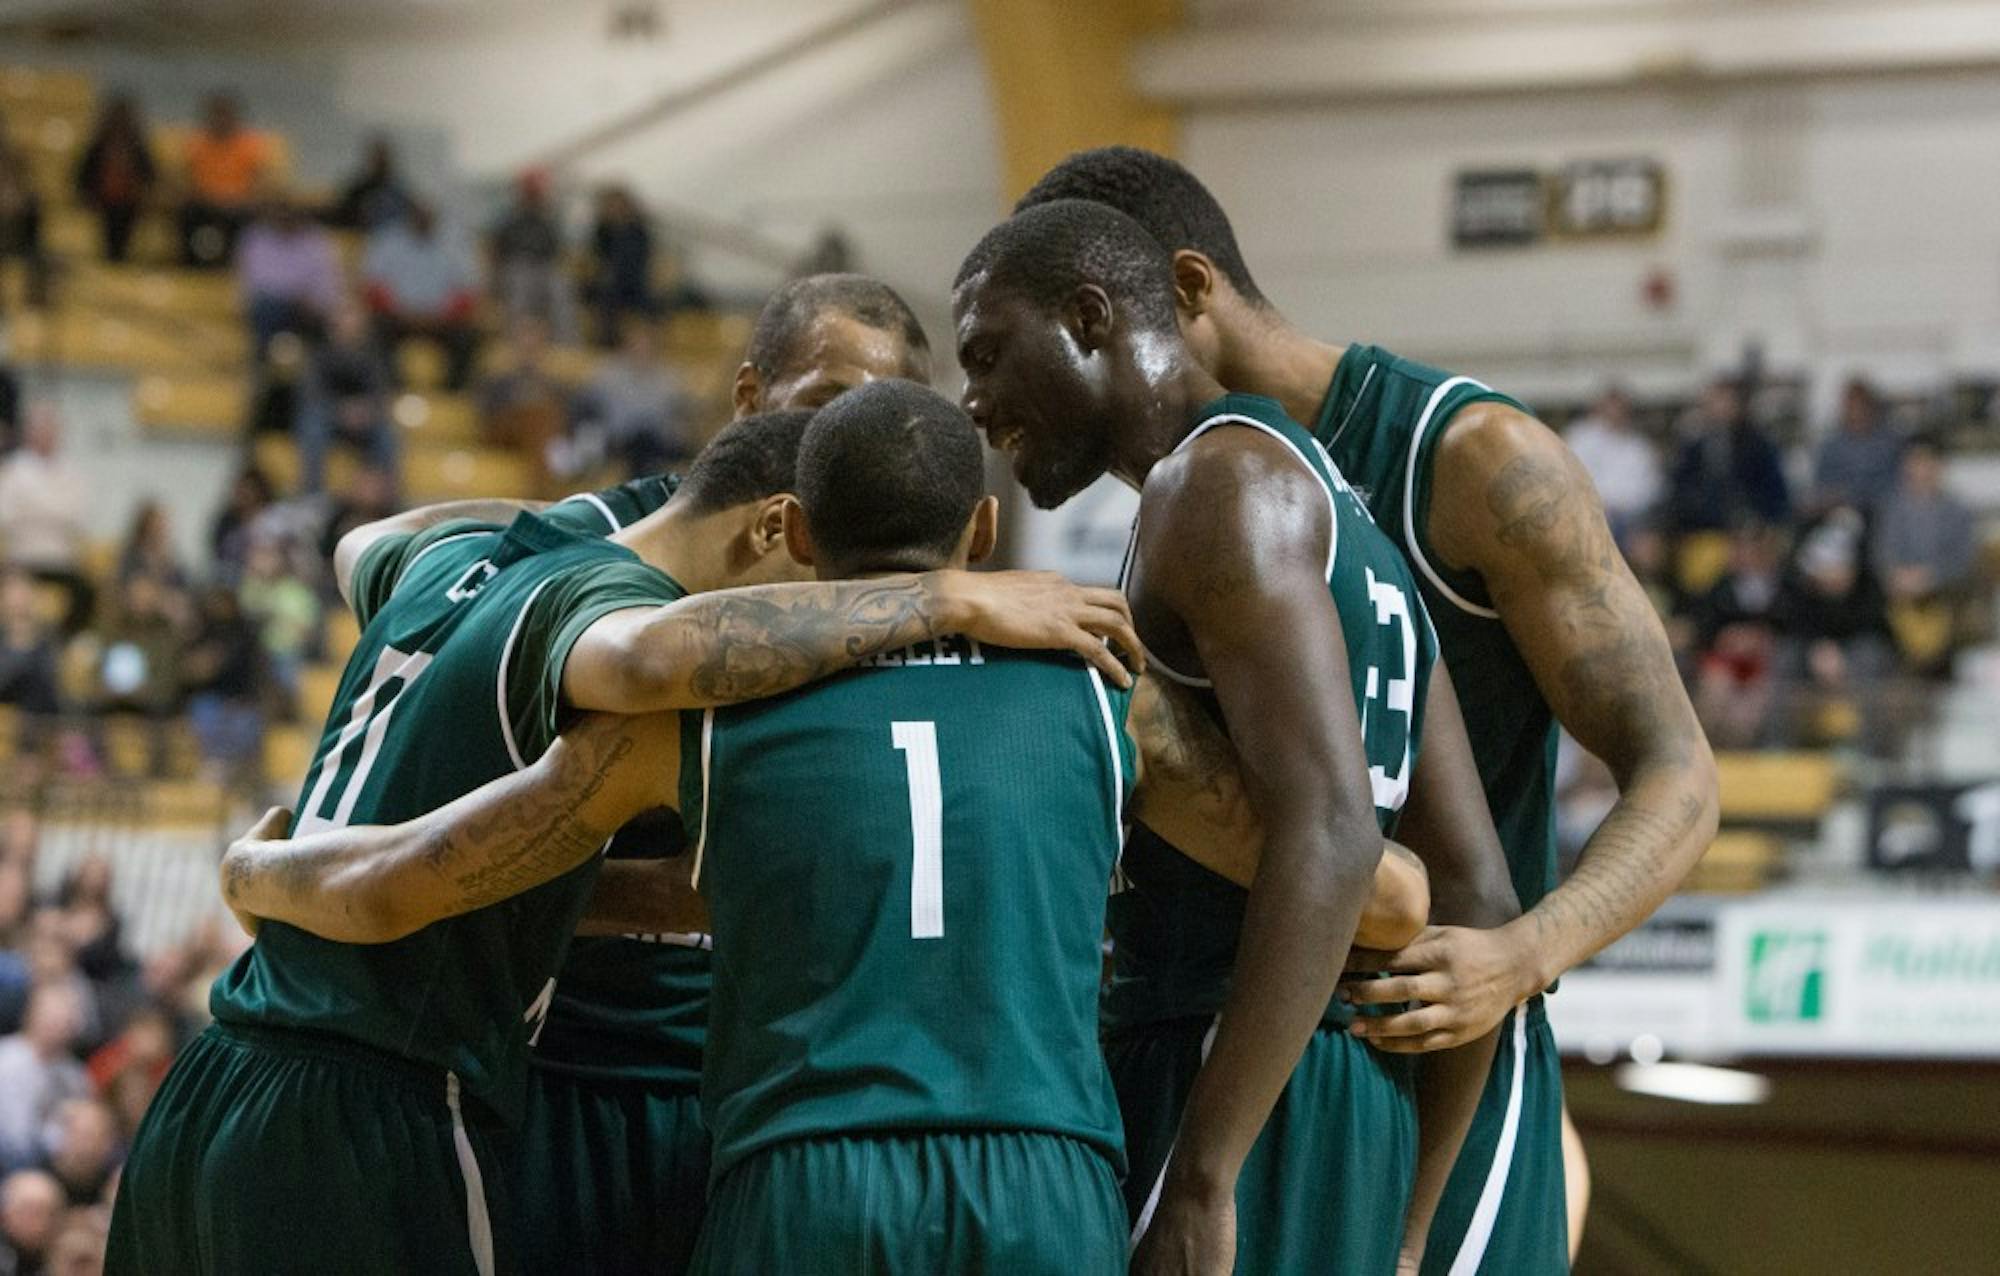 Eastern Michigan regroups before free throws in the Eagles 75-67 loss to Western Michigan Sunday afternoon in Kalamazoo.